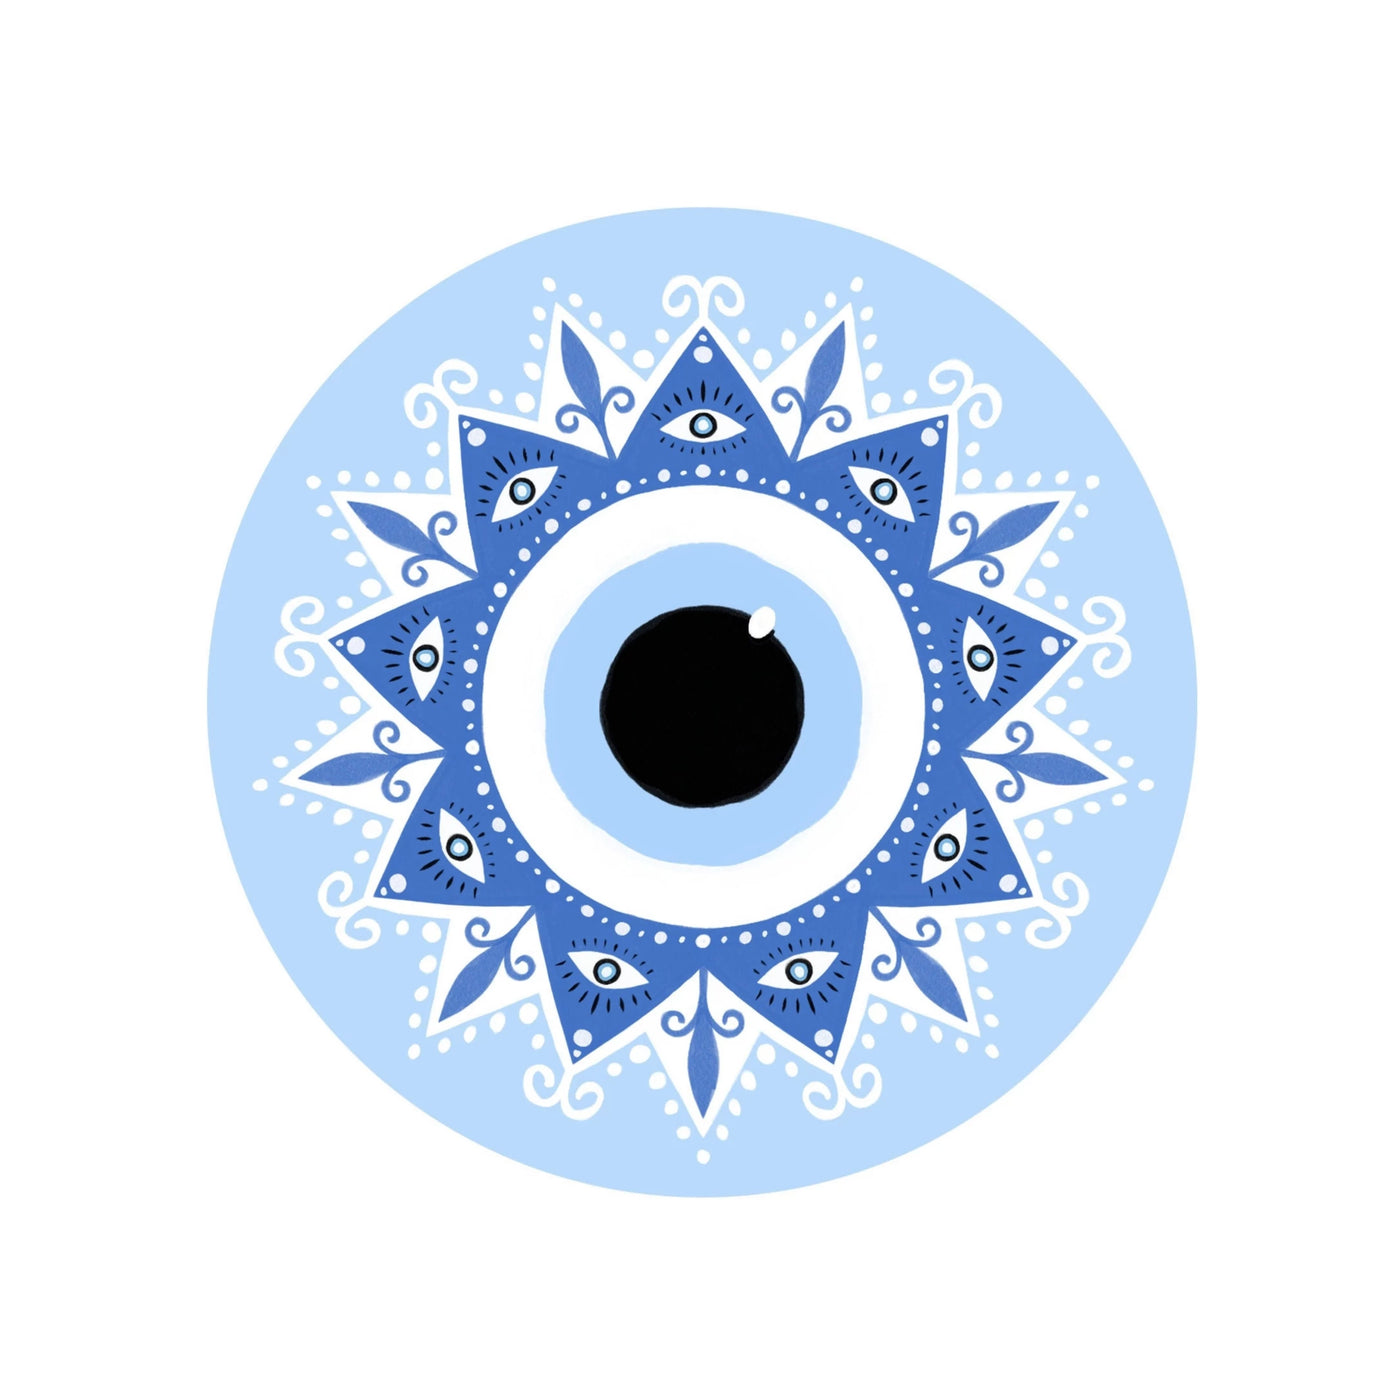 Round light blue sticker with an image of an eye in the center surrounded with a white and blue design that includes 9 other eyes.